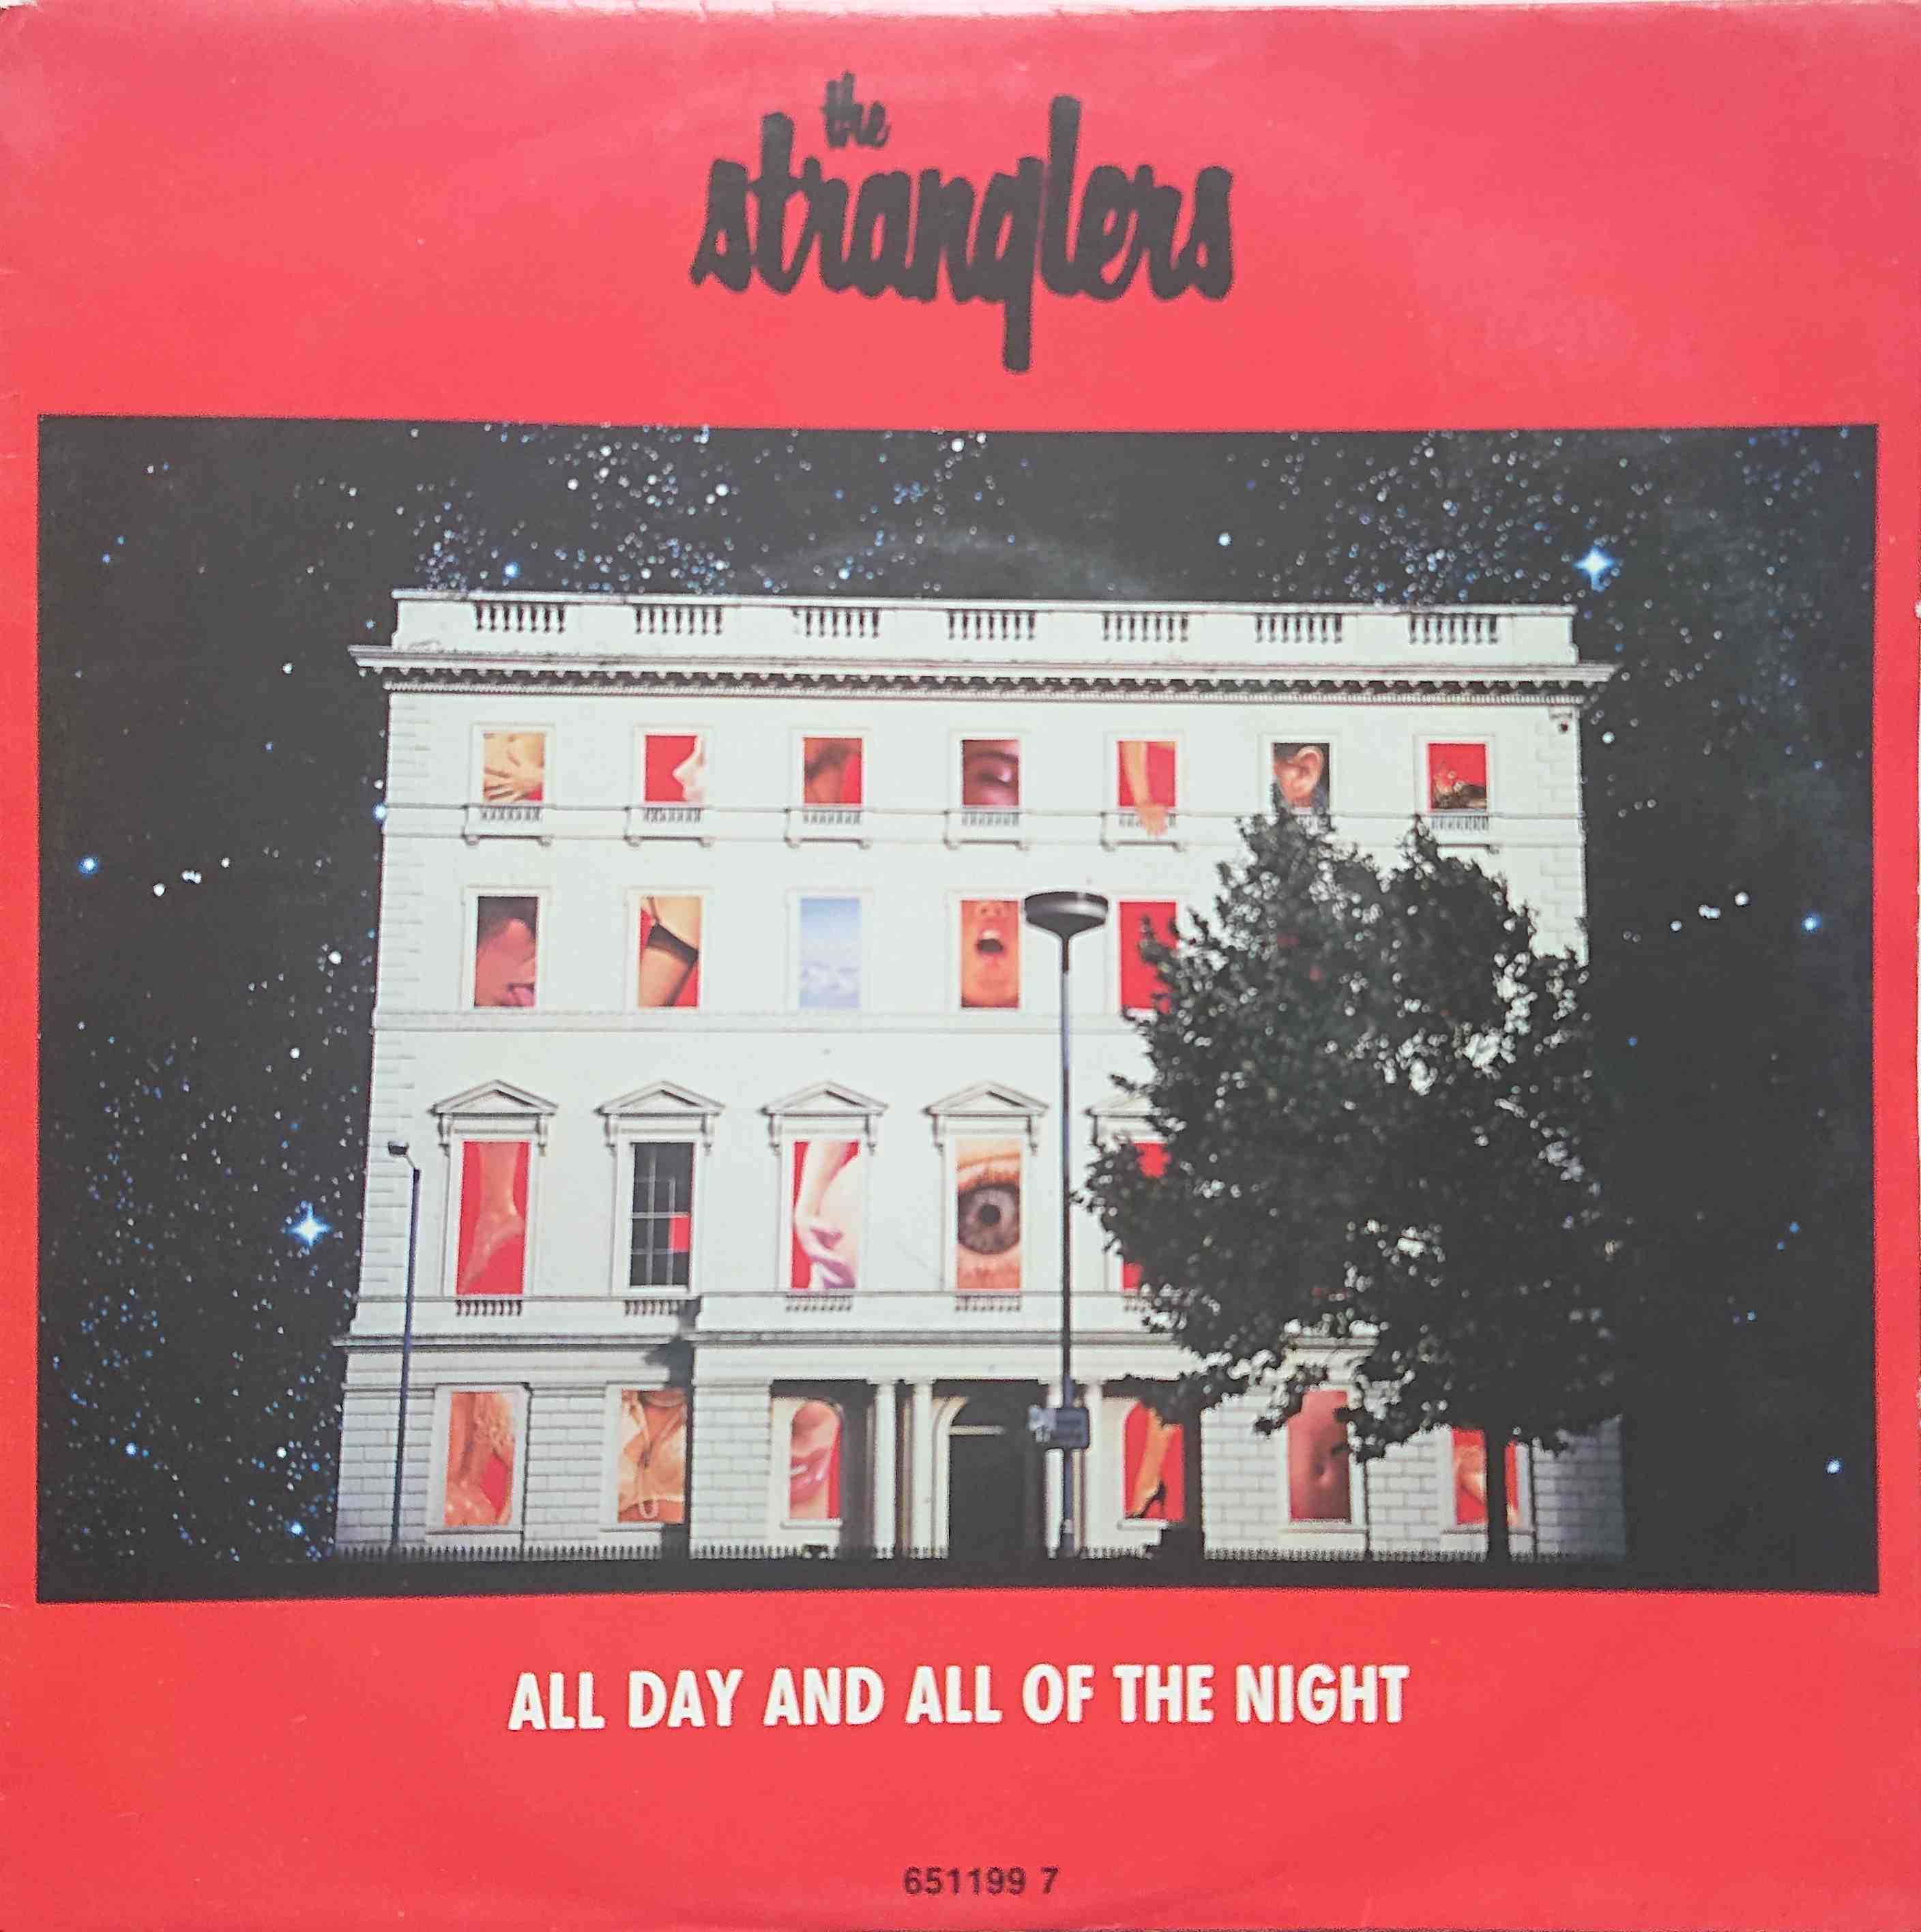 Picture of All day and all of the night by artist The Stranglers from The Stranglers singles